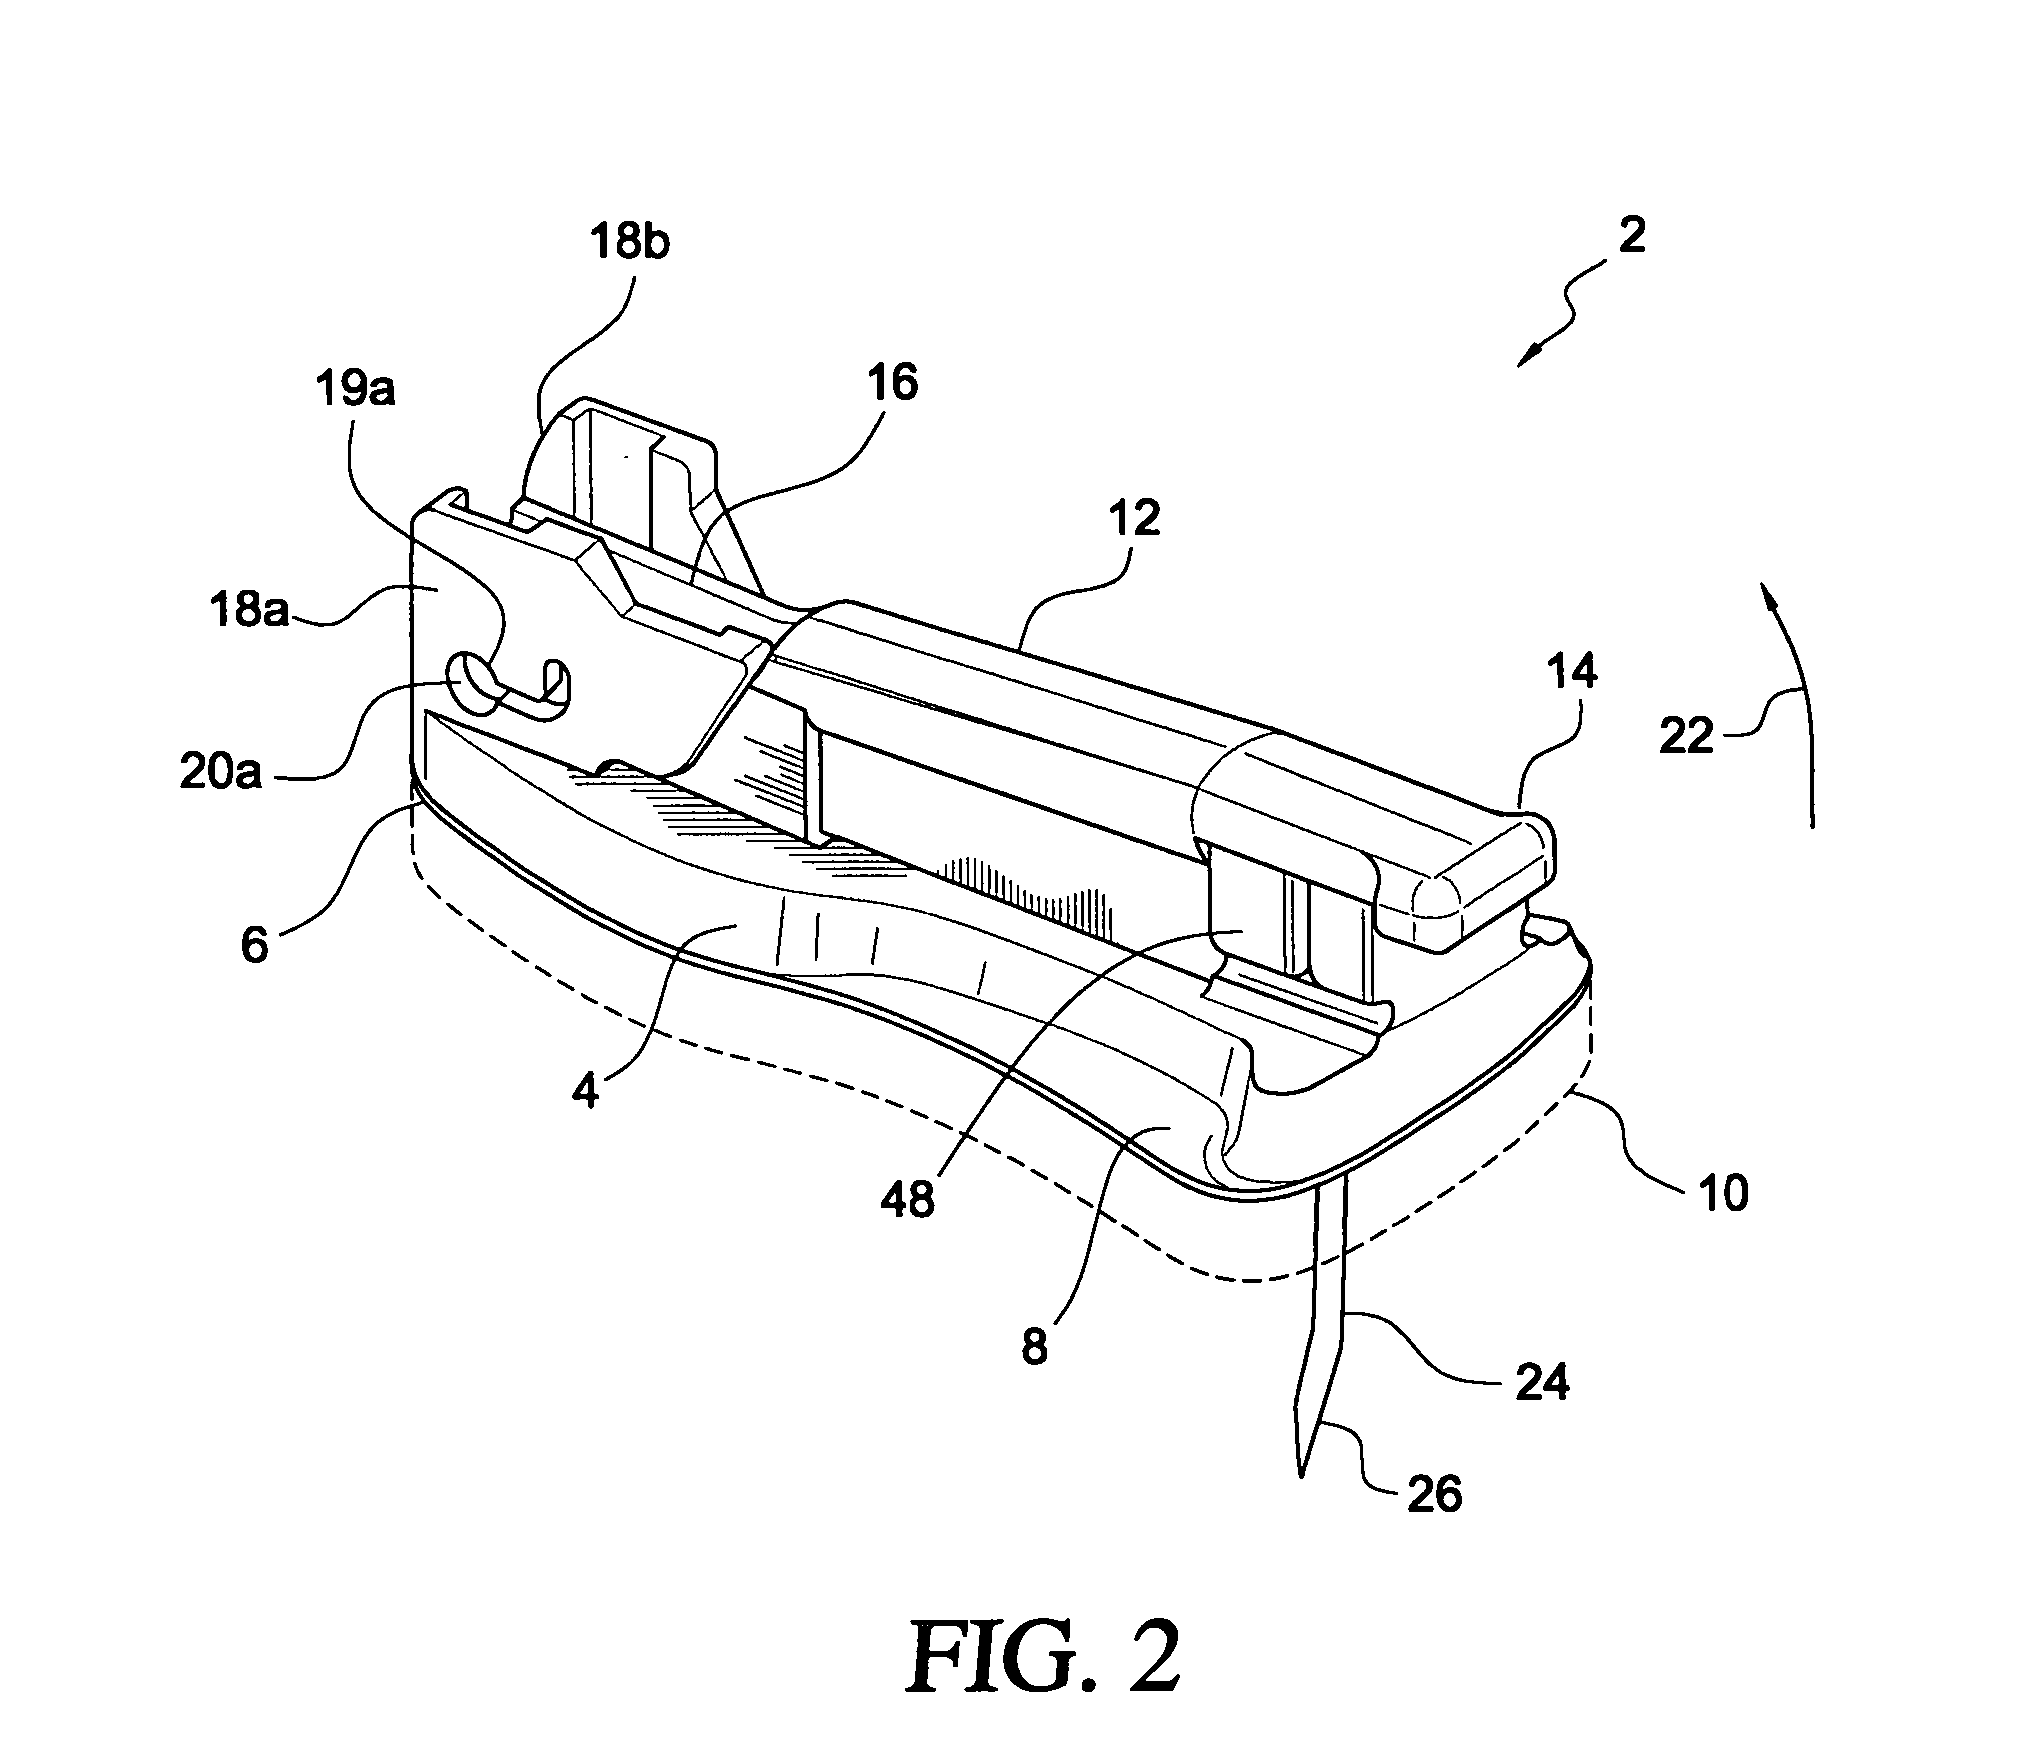 Portal access device with removable sharps protection